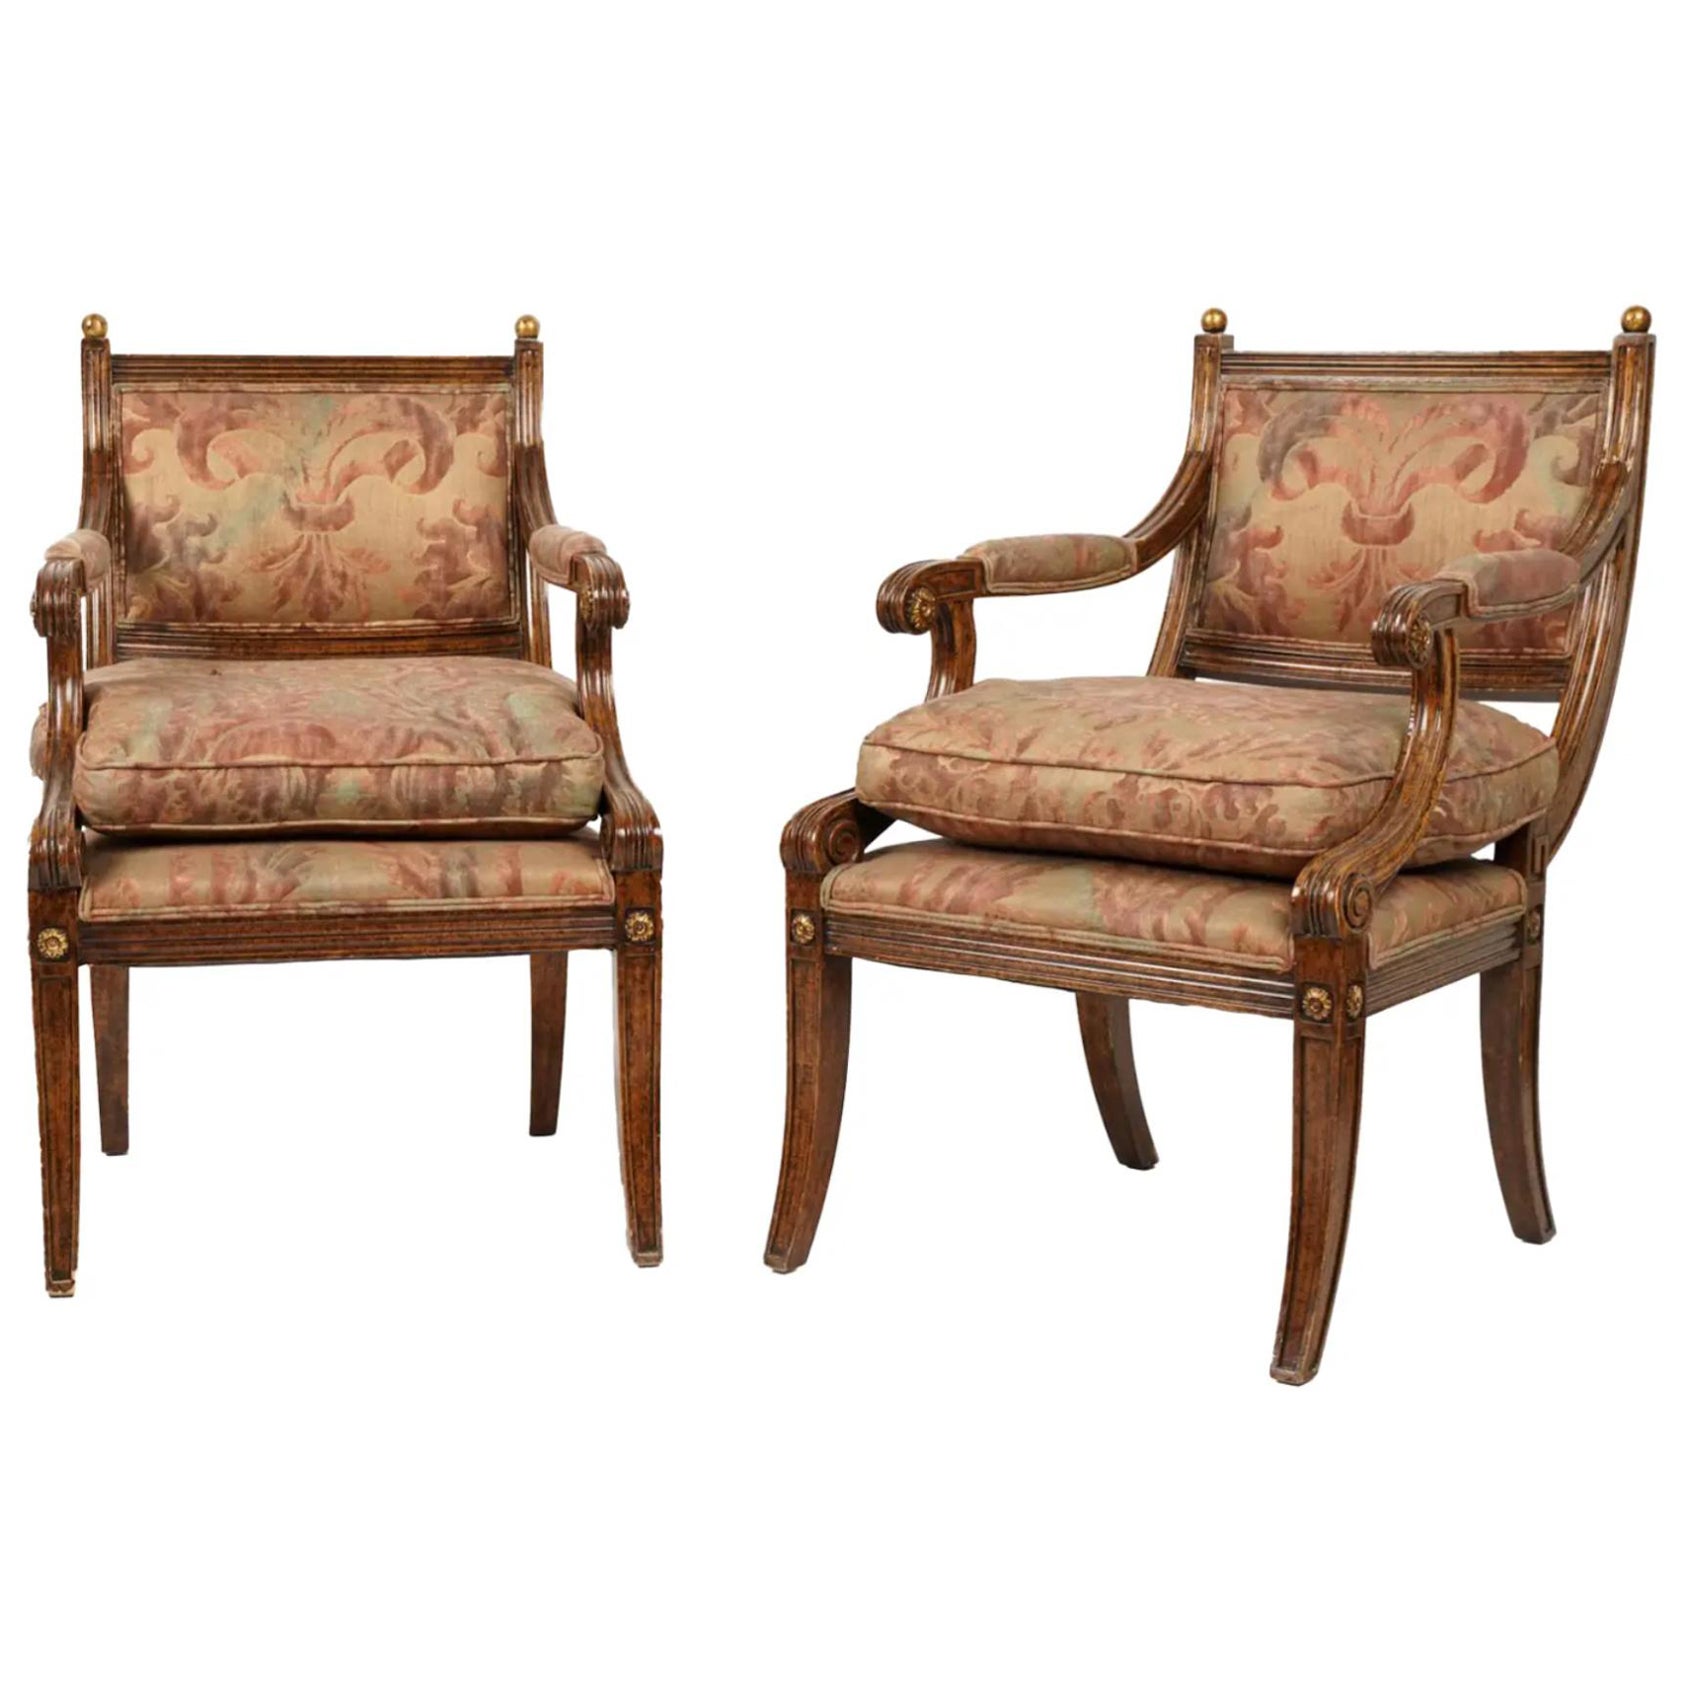 Pair of Regency Style Fortuny Giltwood Arm Chairs